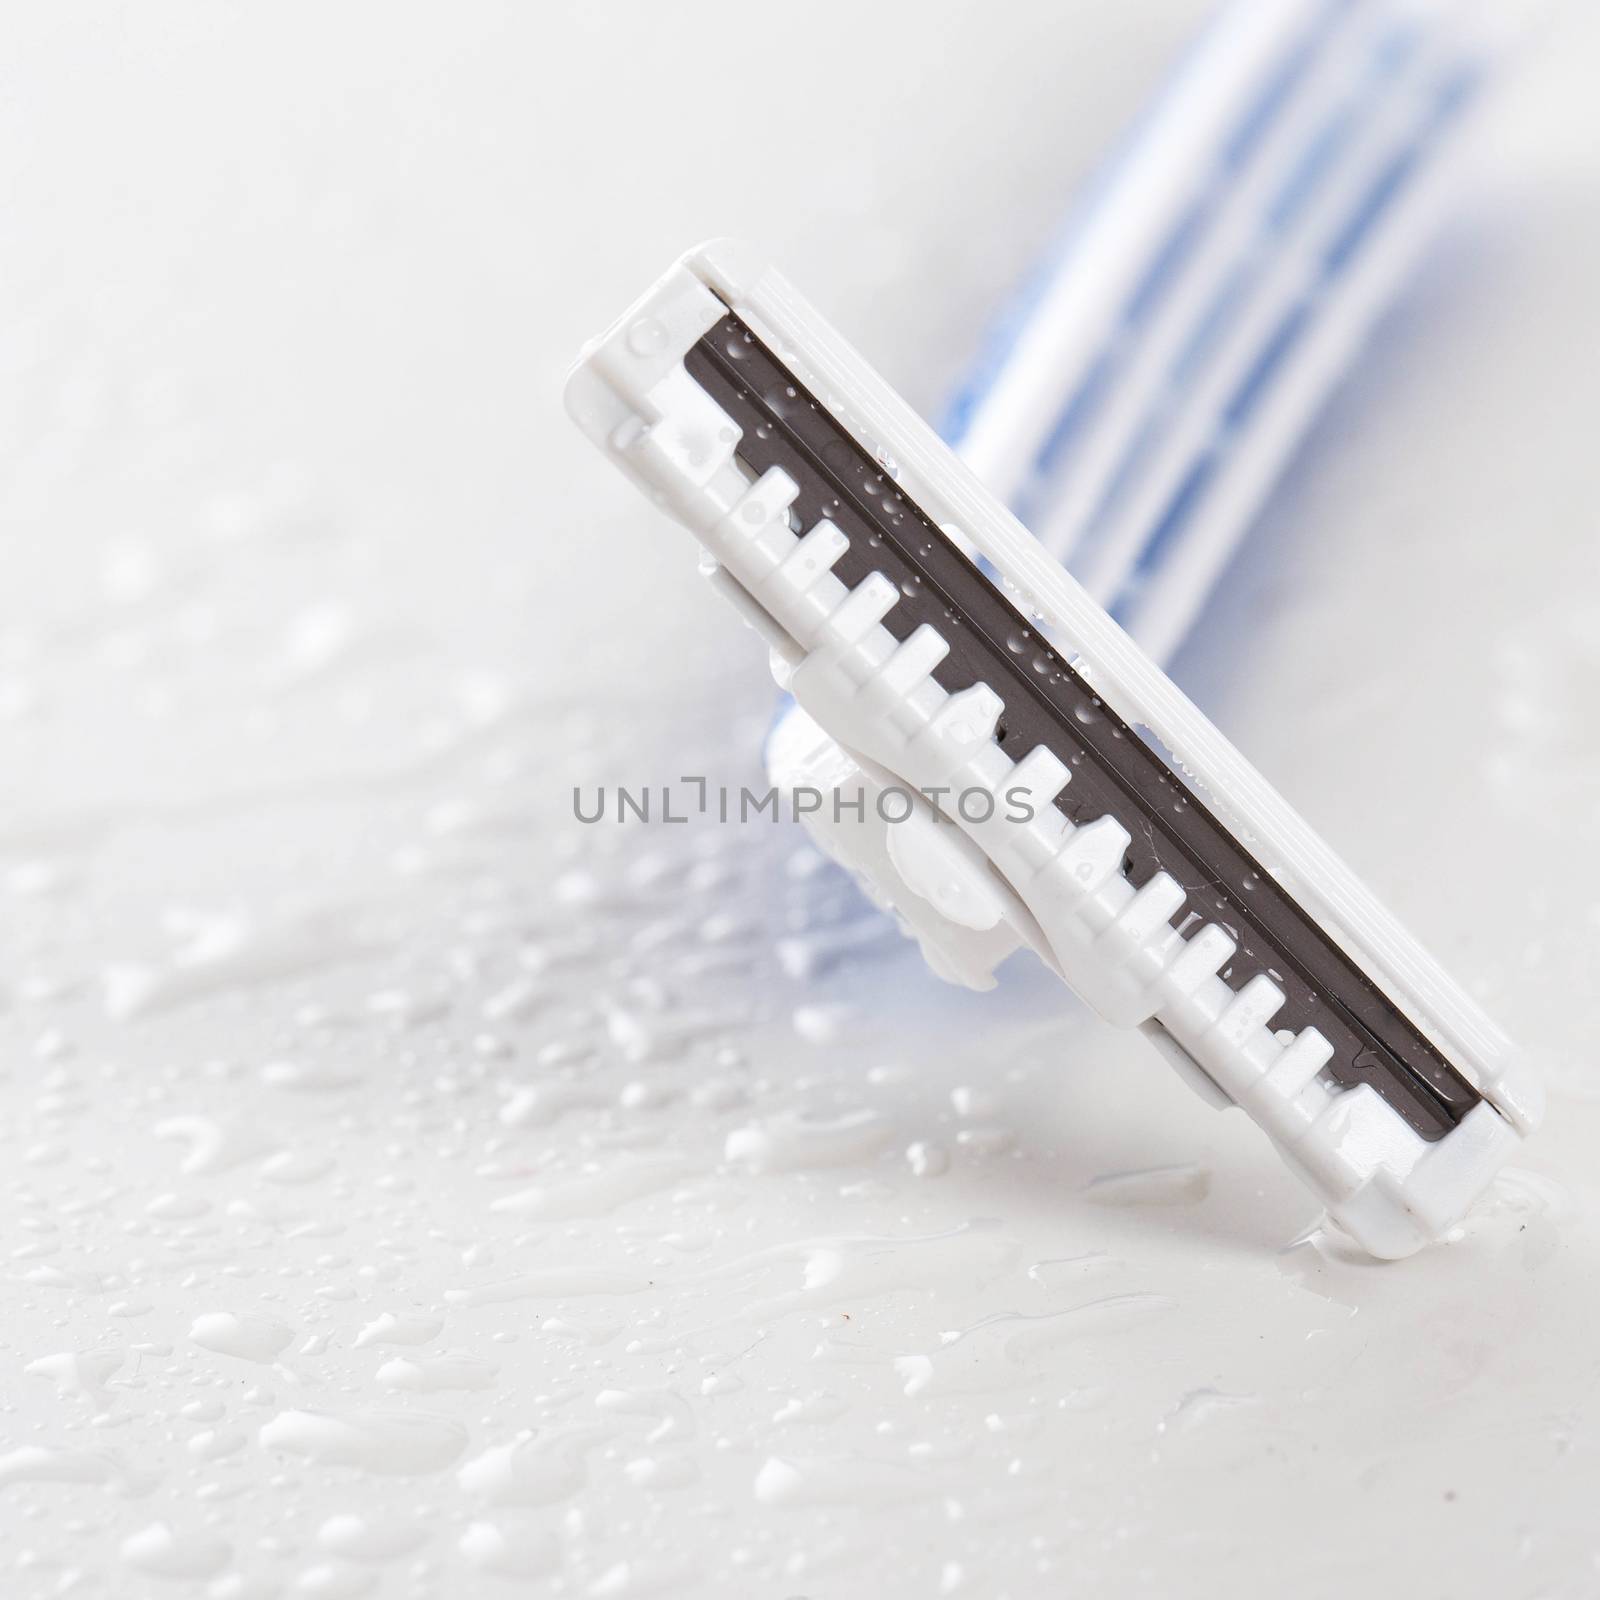 Picture of white and blue razor for men over a white background